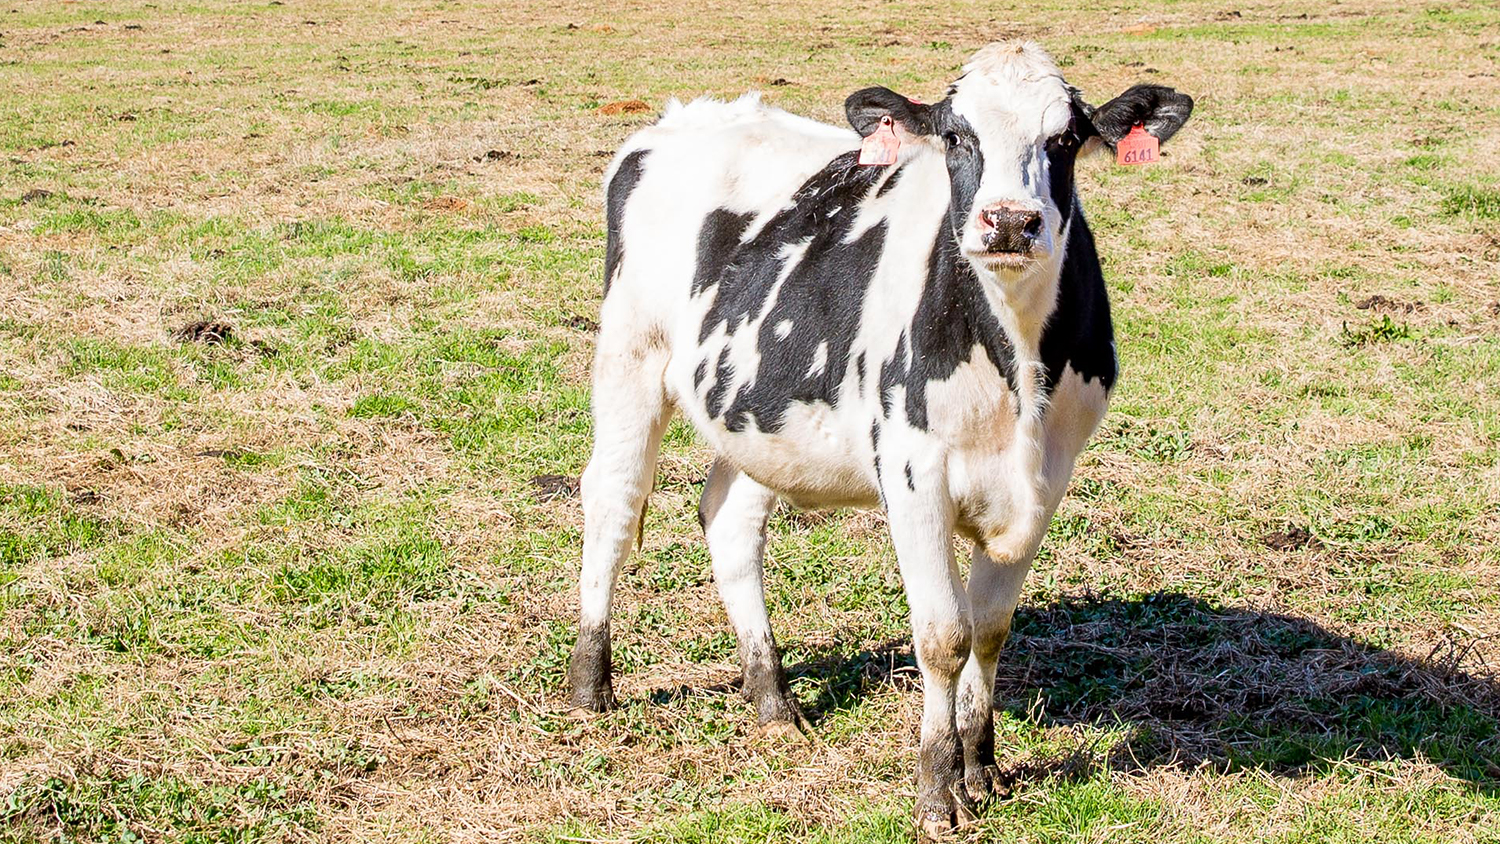 A black and white cow stands in an open field.